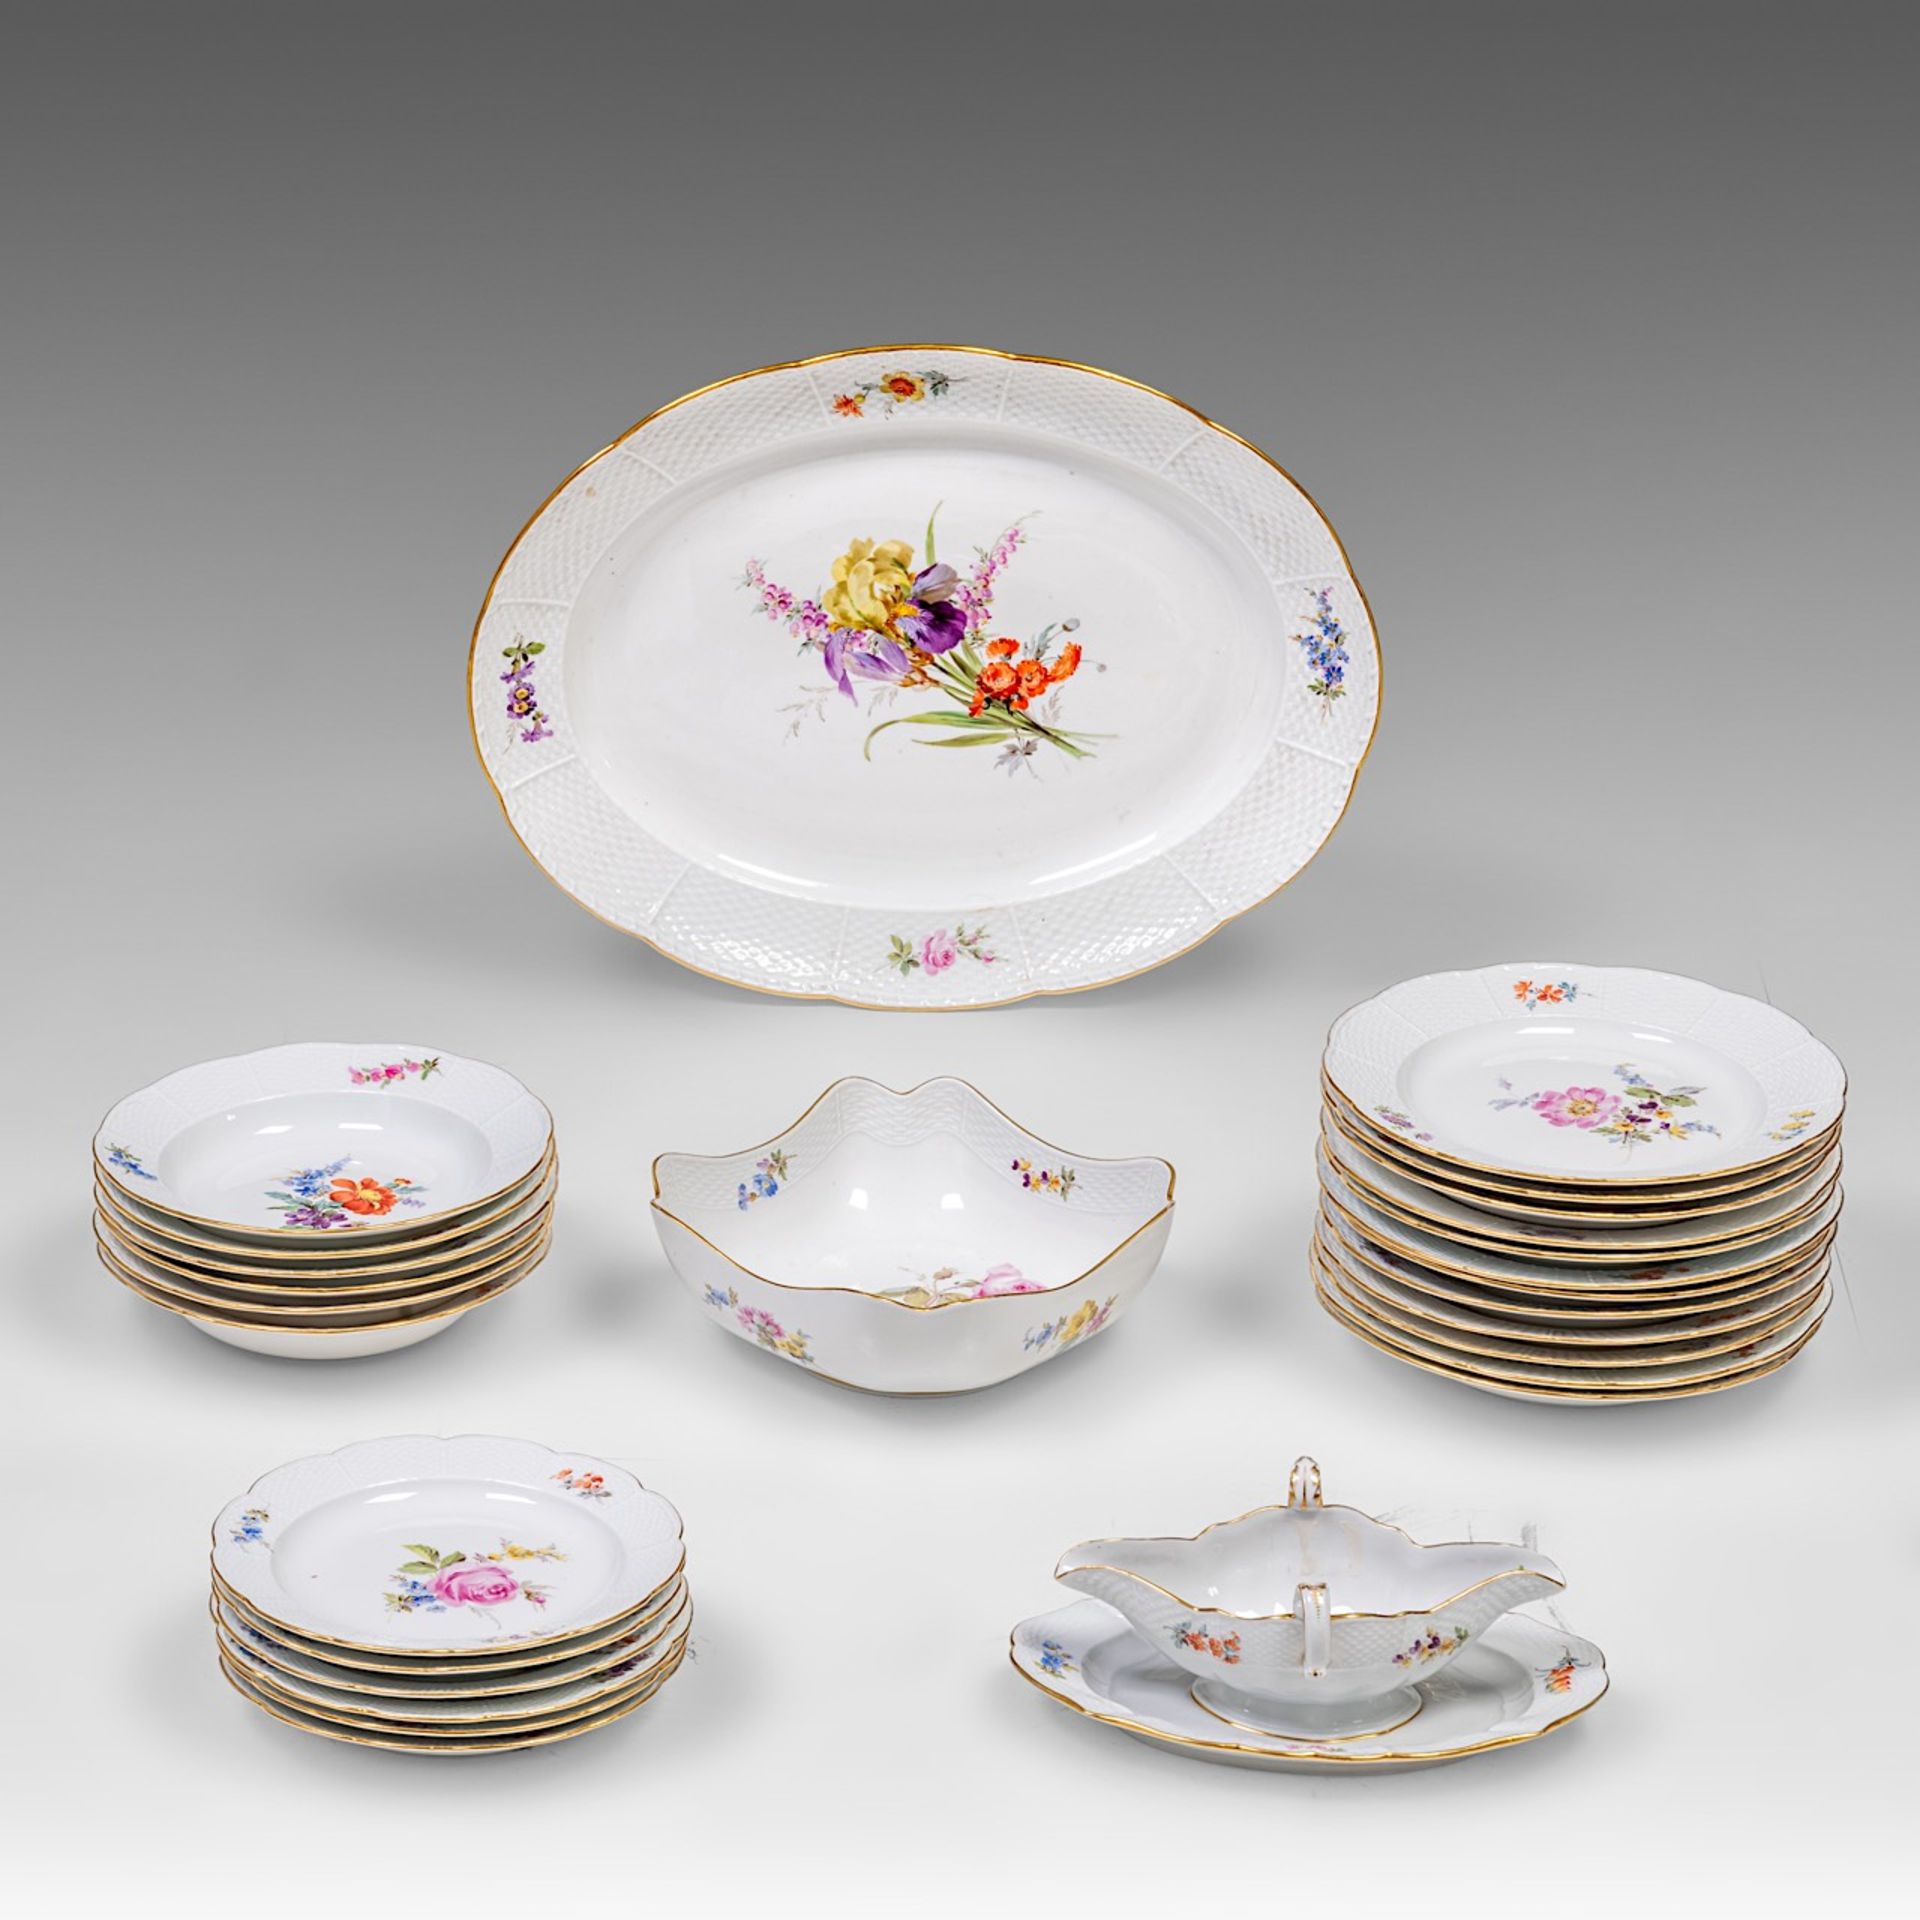 A Meissen porcelain service set with 'Alte Ozier' edges and hand-painted floral decoration, marked (